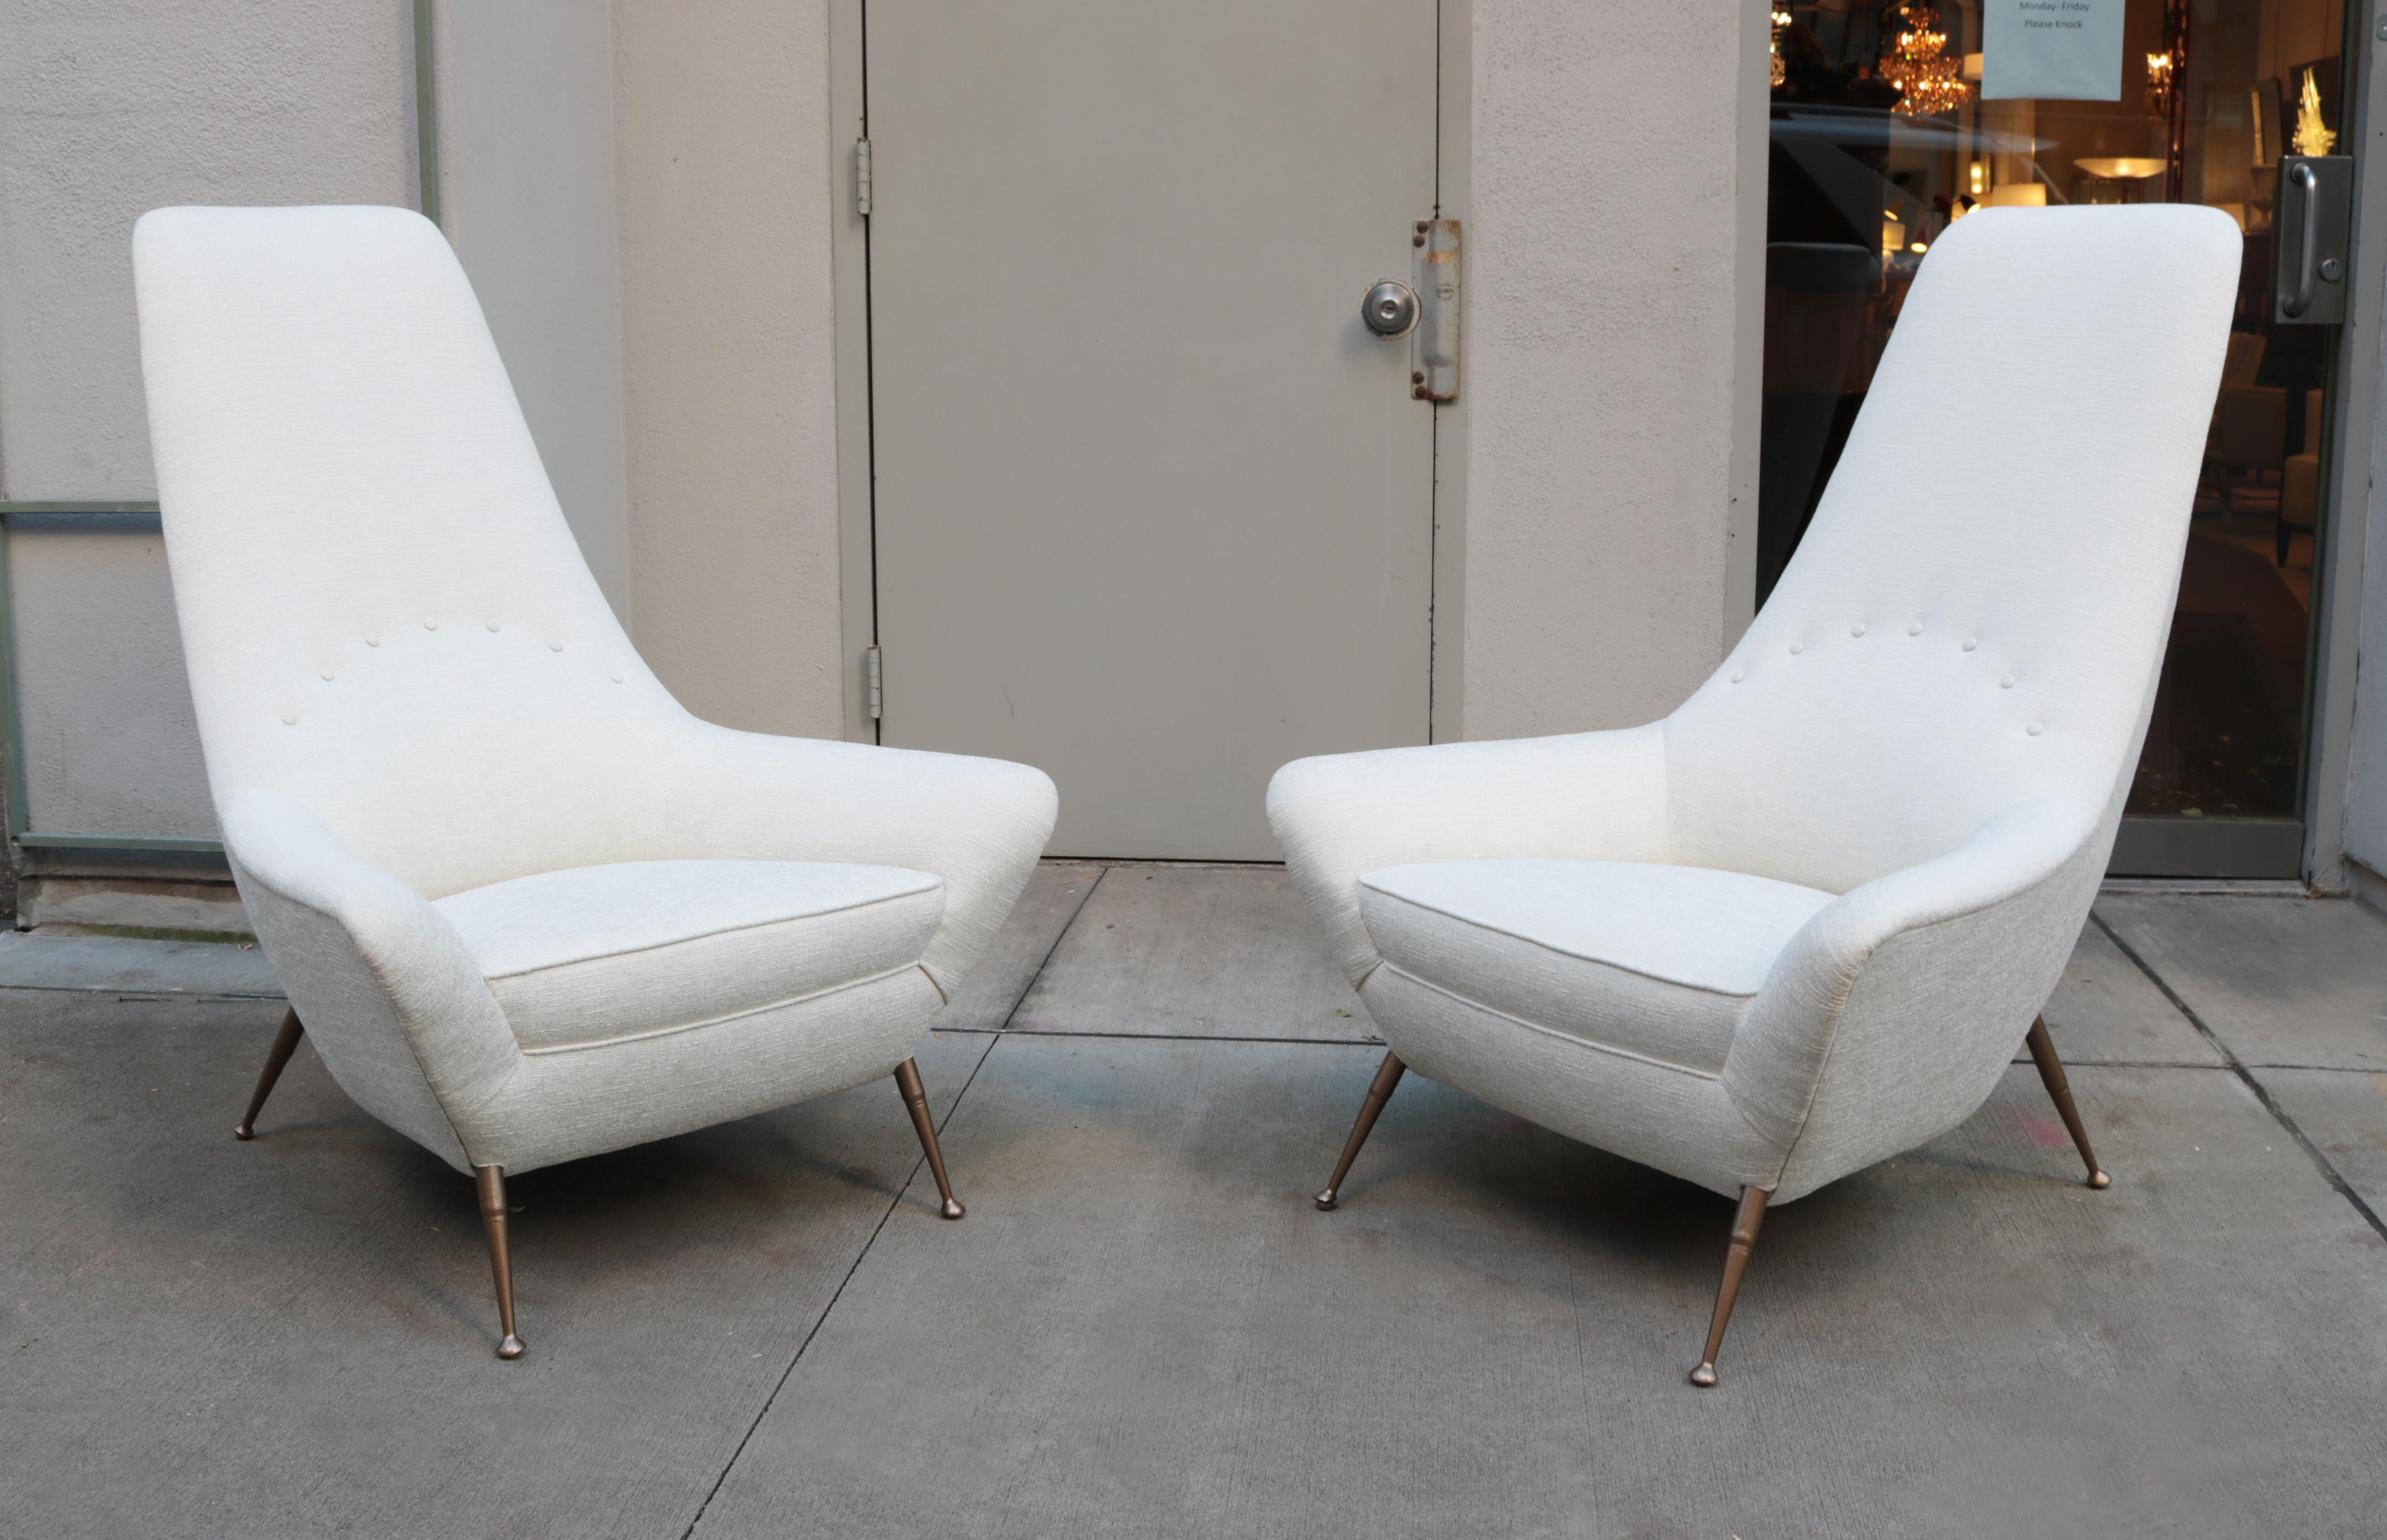 Pair of sculptural tall back Italian chairs.
Newly upholstered with brass leg details.